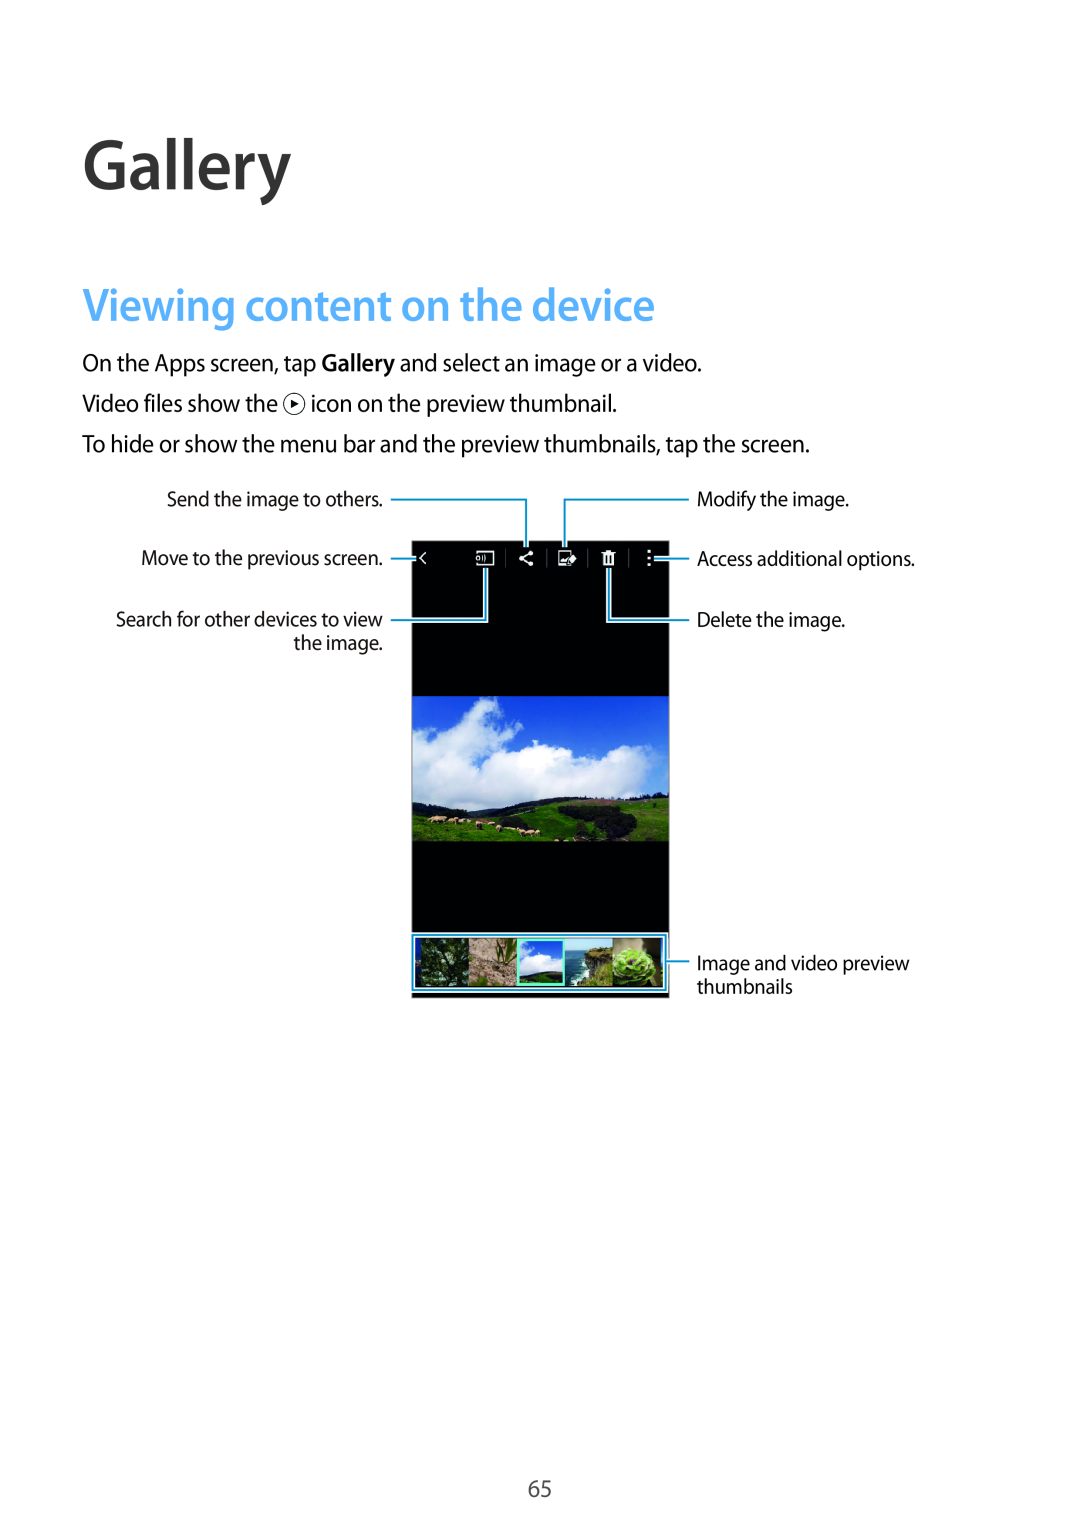 Samsung SM-A300FZWUBOG manual Gallery, Viewing content on the device, Send the image to others Move to the previous screen 